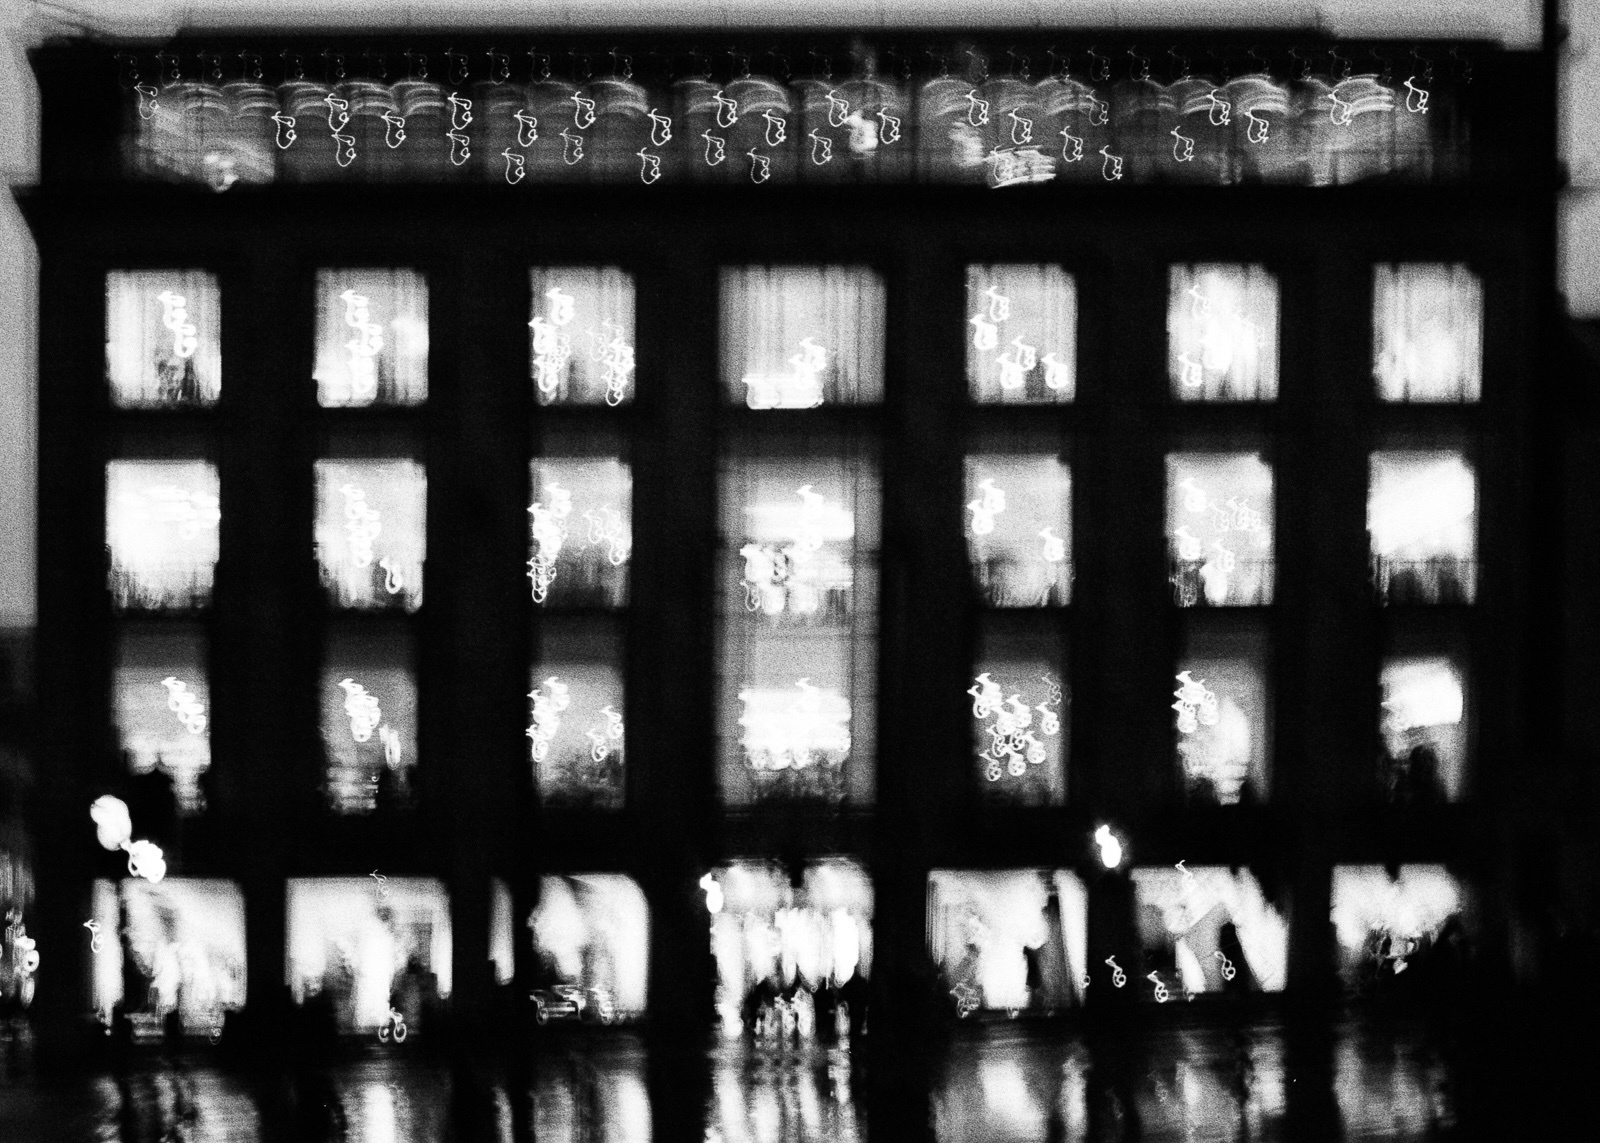 Black and white image of a blurred building facade at night with multiple windows showing interior lights, giving a bokeh effect.